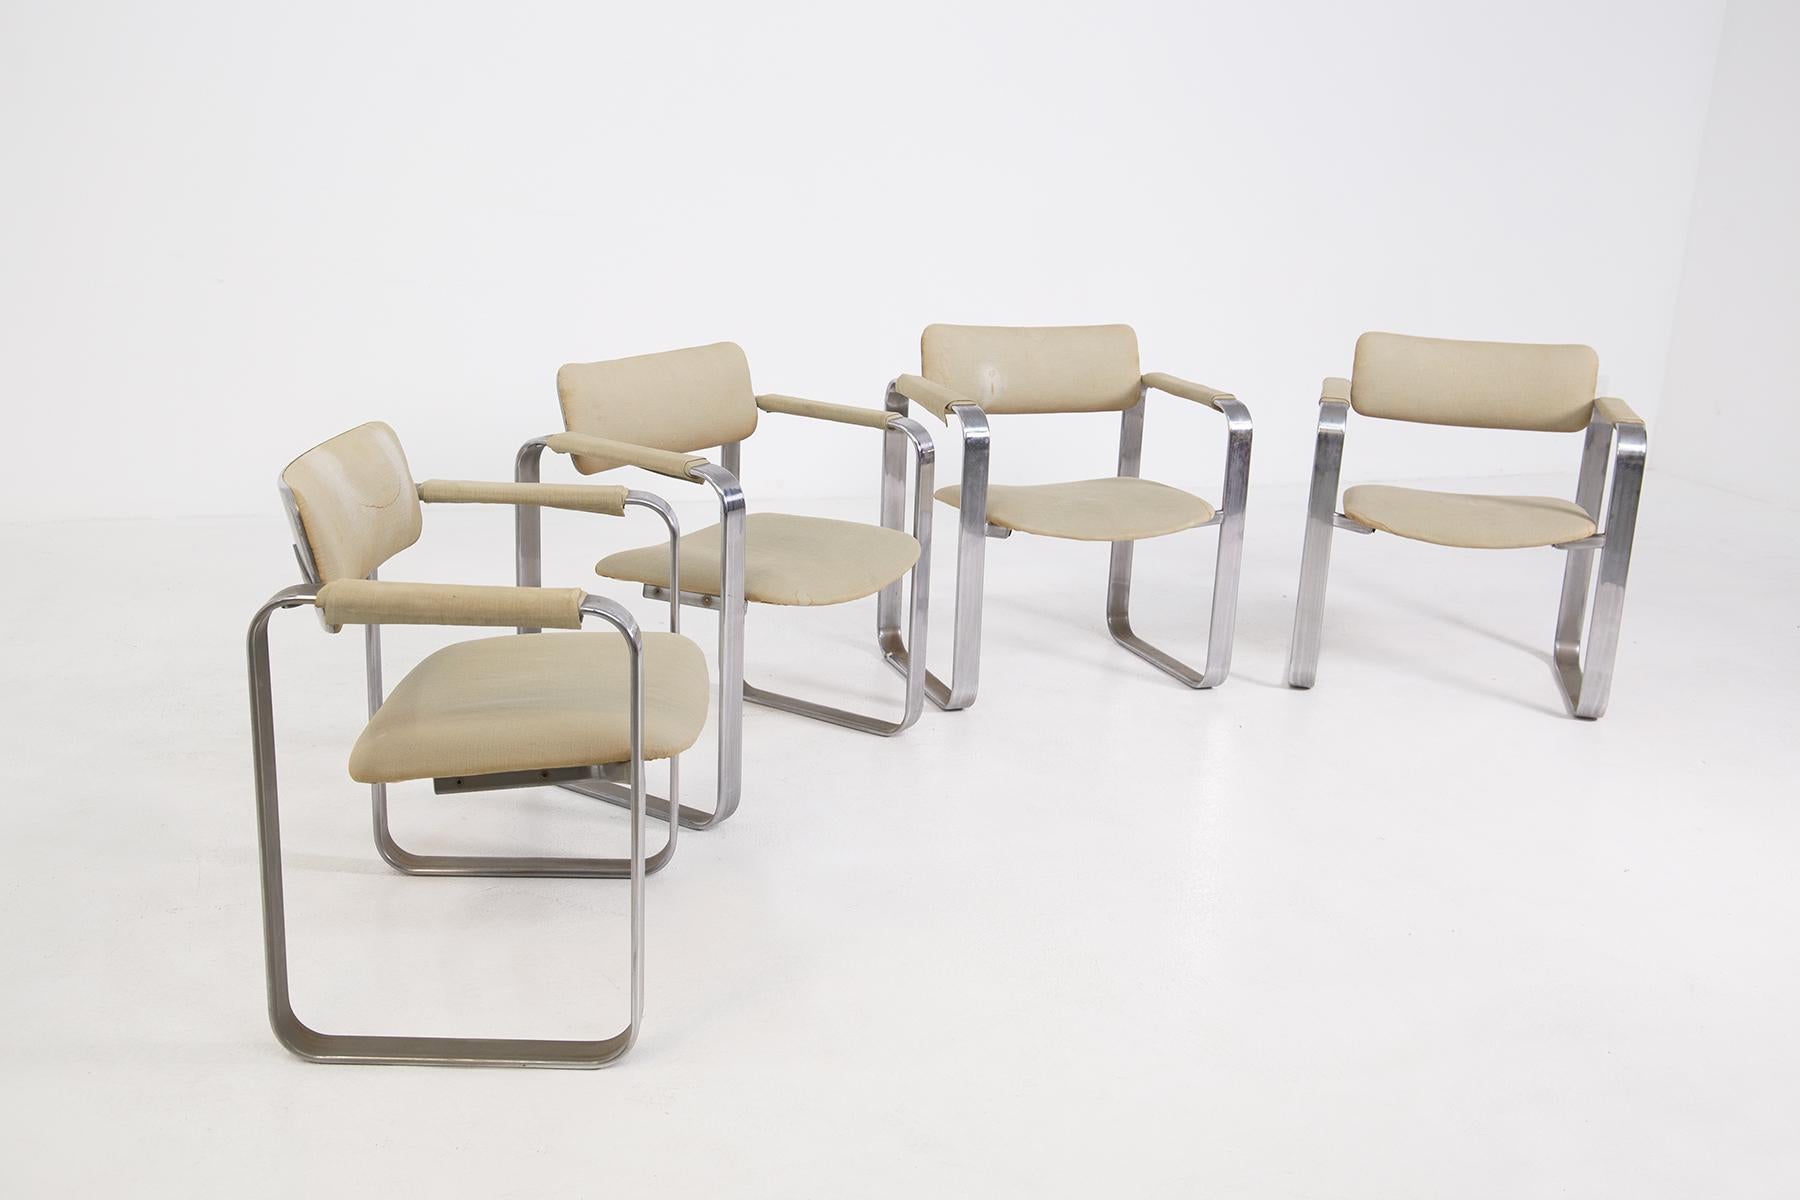 Geometric set of 4 chairs attributed to Giuseppe Pagano from the 1940s-1950s.
The set is made entirely of a chrome-plated steel frame.
The set has been attributed to Giuseppe Pagano because of the line of its perfectly geometric, square legs.